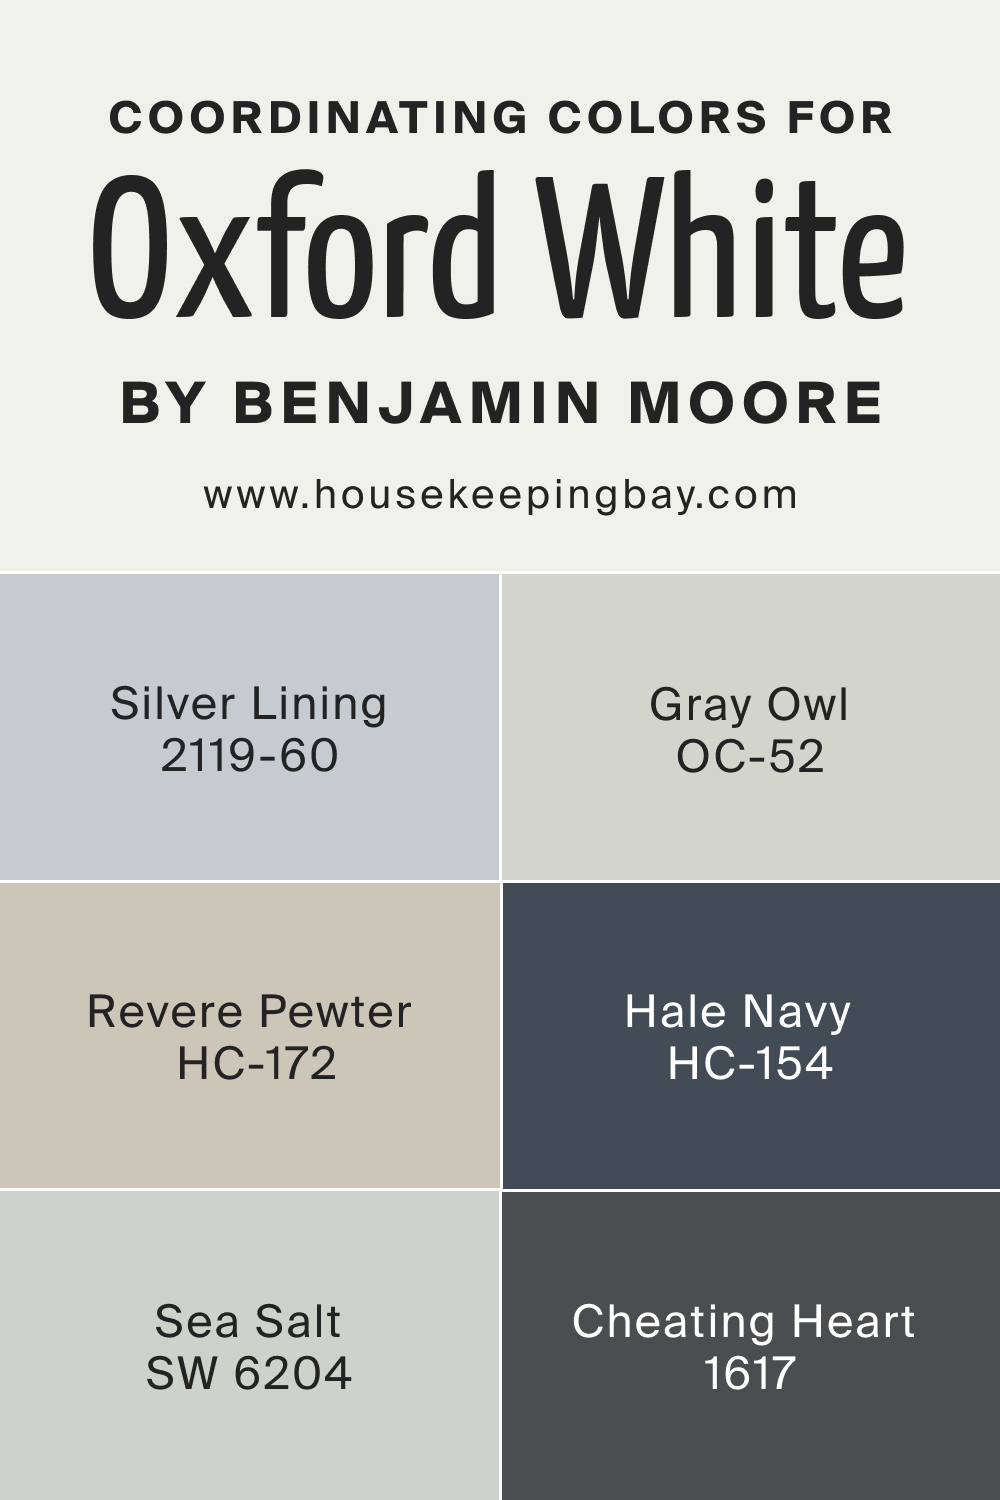 What Coordinating Colors BM Oxford White Has